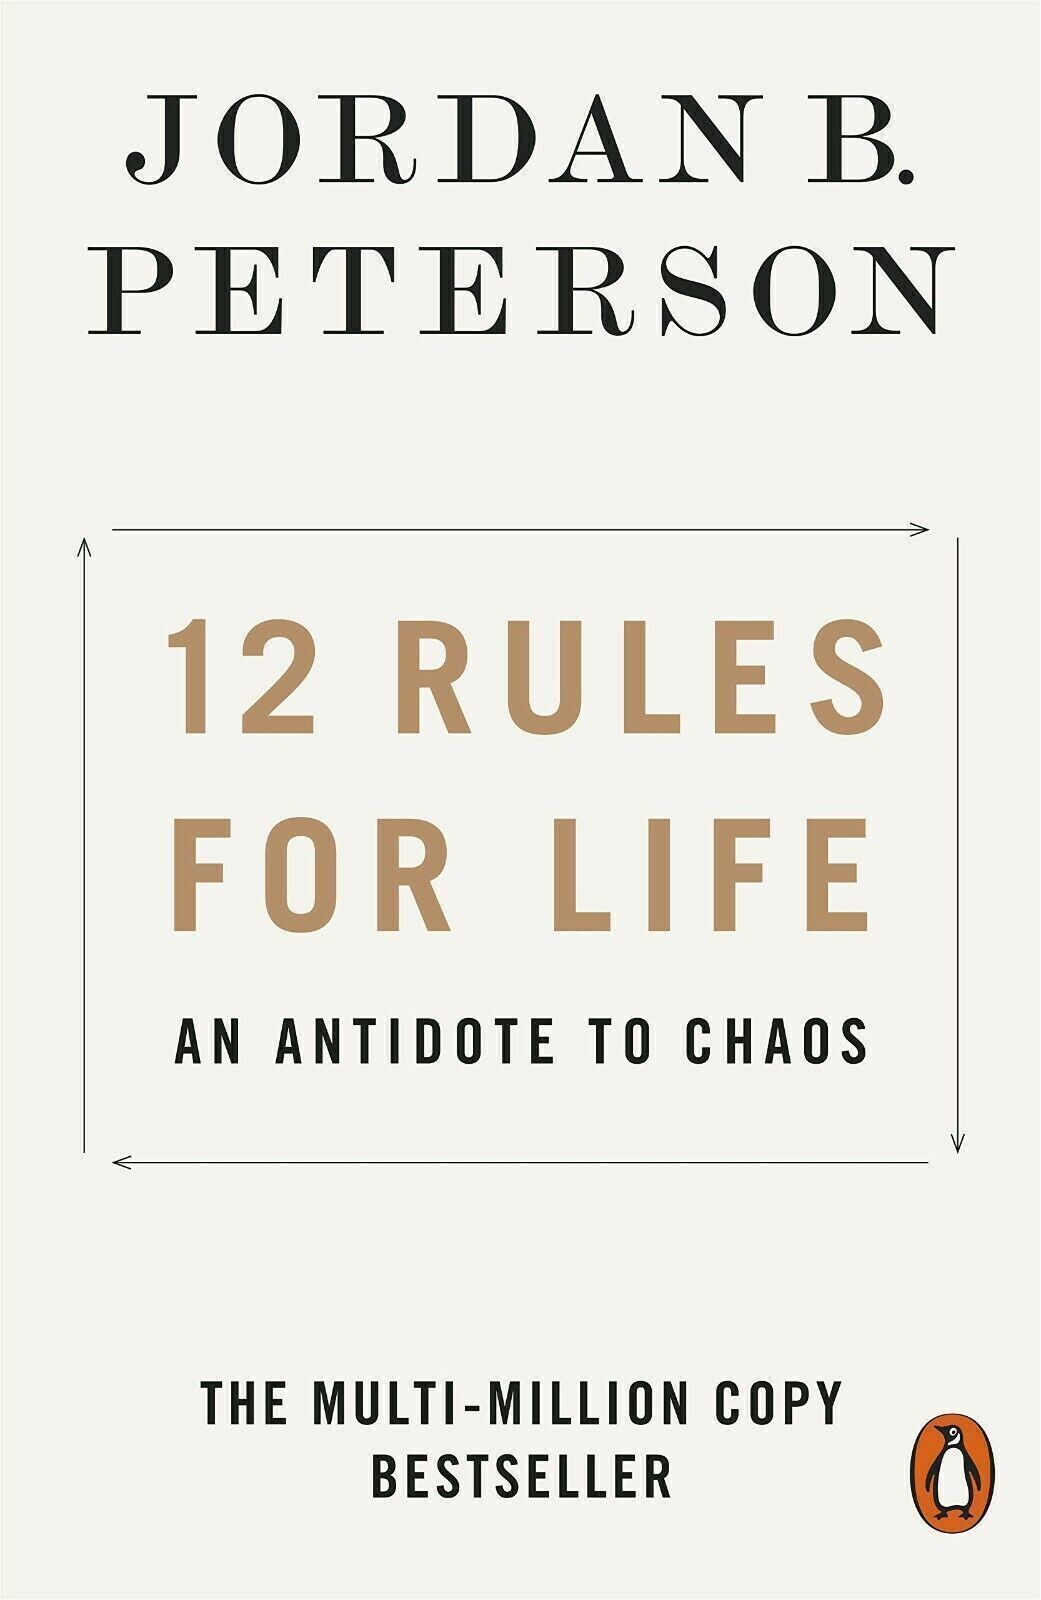 12 Rules for Life- An Antidote to Chaos Cover